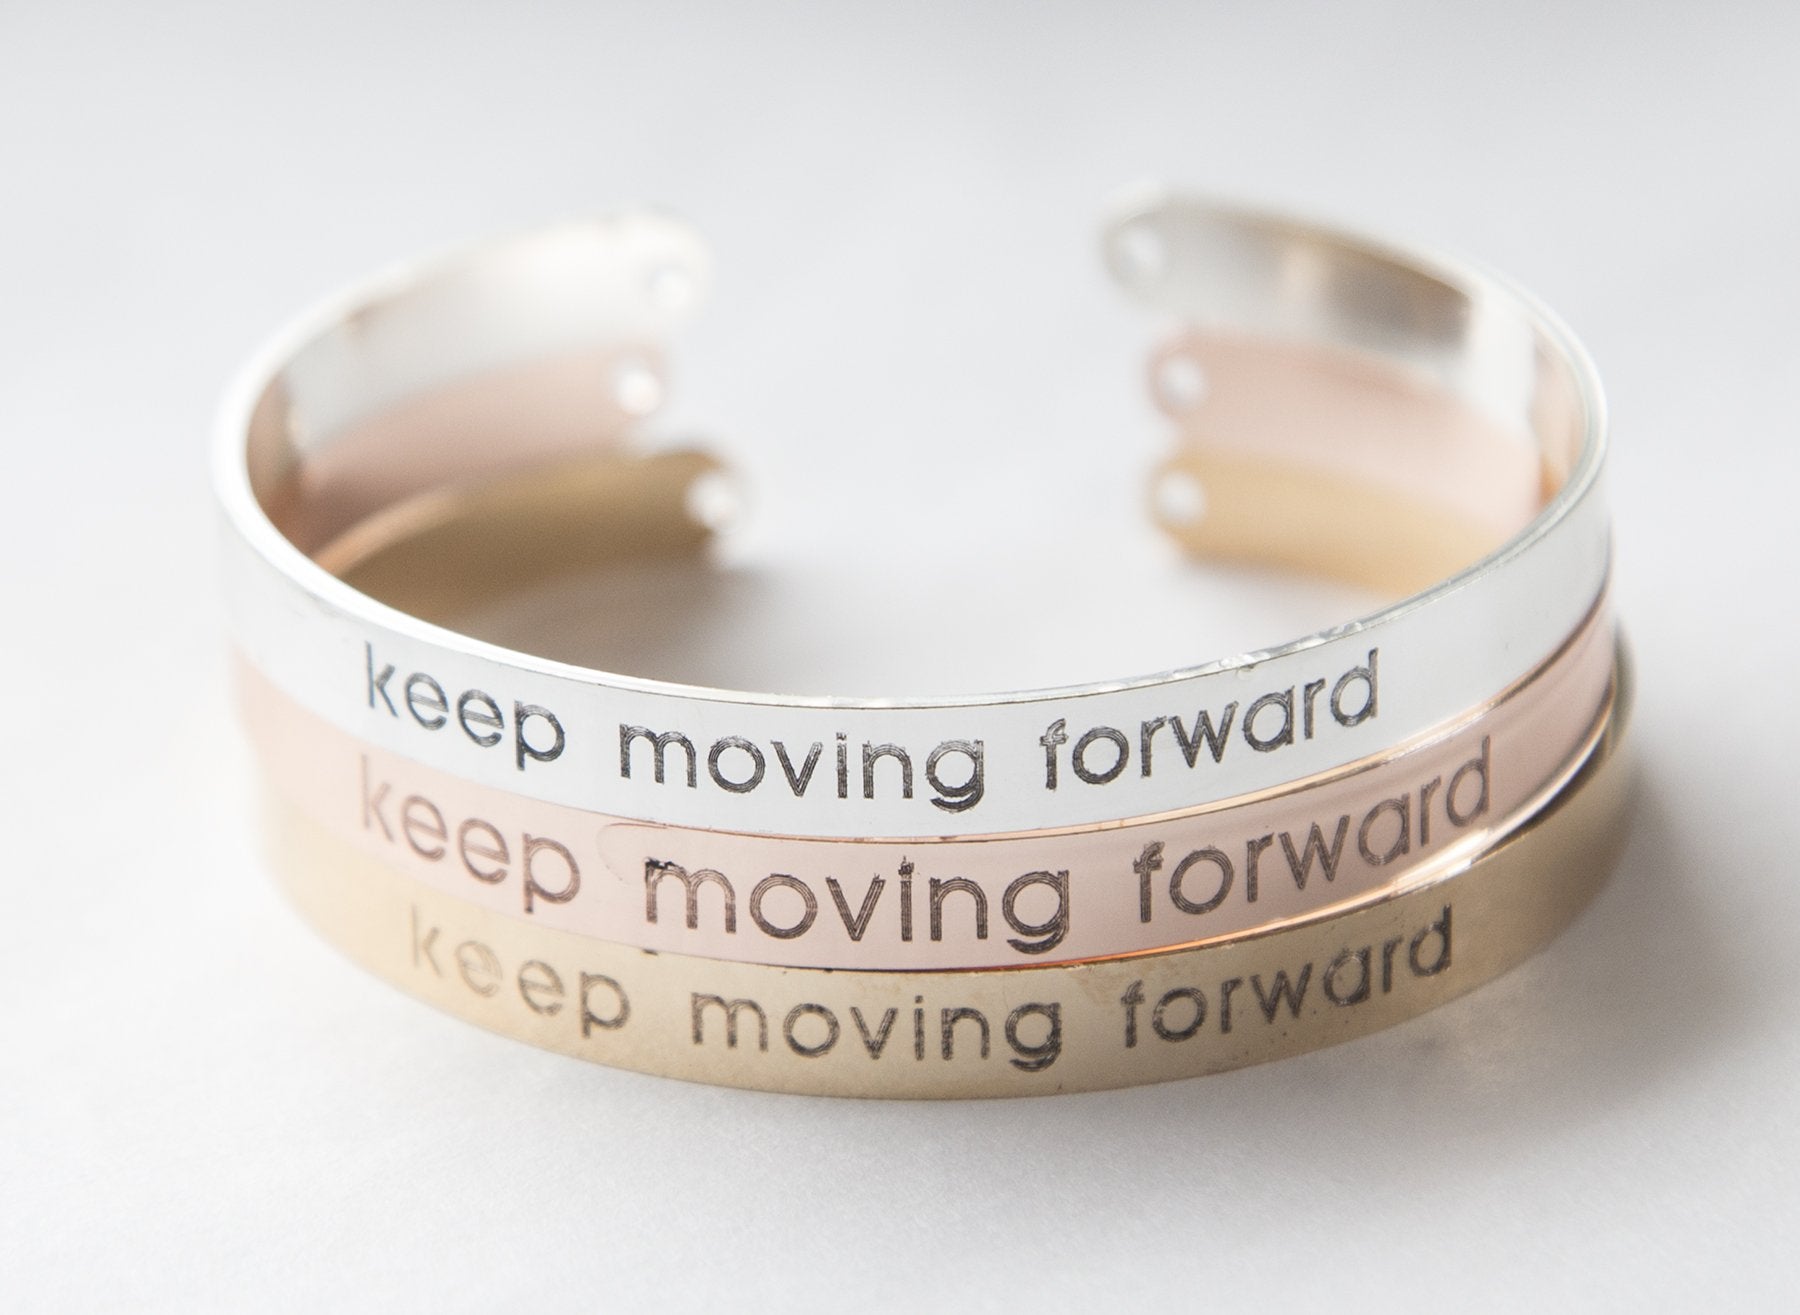 Motivational Keep Moving Forward Engraved Bracelet - Adjustable Copper with Gold, Rose Gold or Silver Plating - 6mm Wide, 16cm Long - Fast Shipping

Keywords: motivational bracelet, engraved bracelet, keep moving forward, adjustable bracelet, copper - Jewelry & Watches - Bijou Her -  -  - 